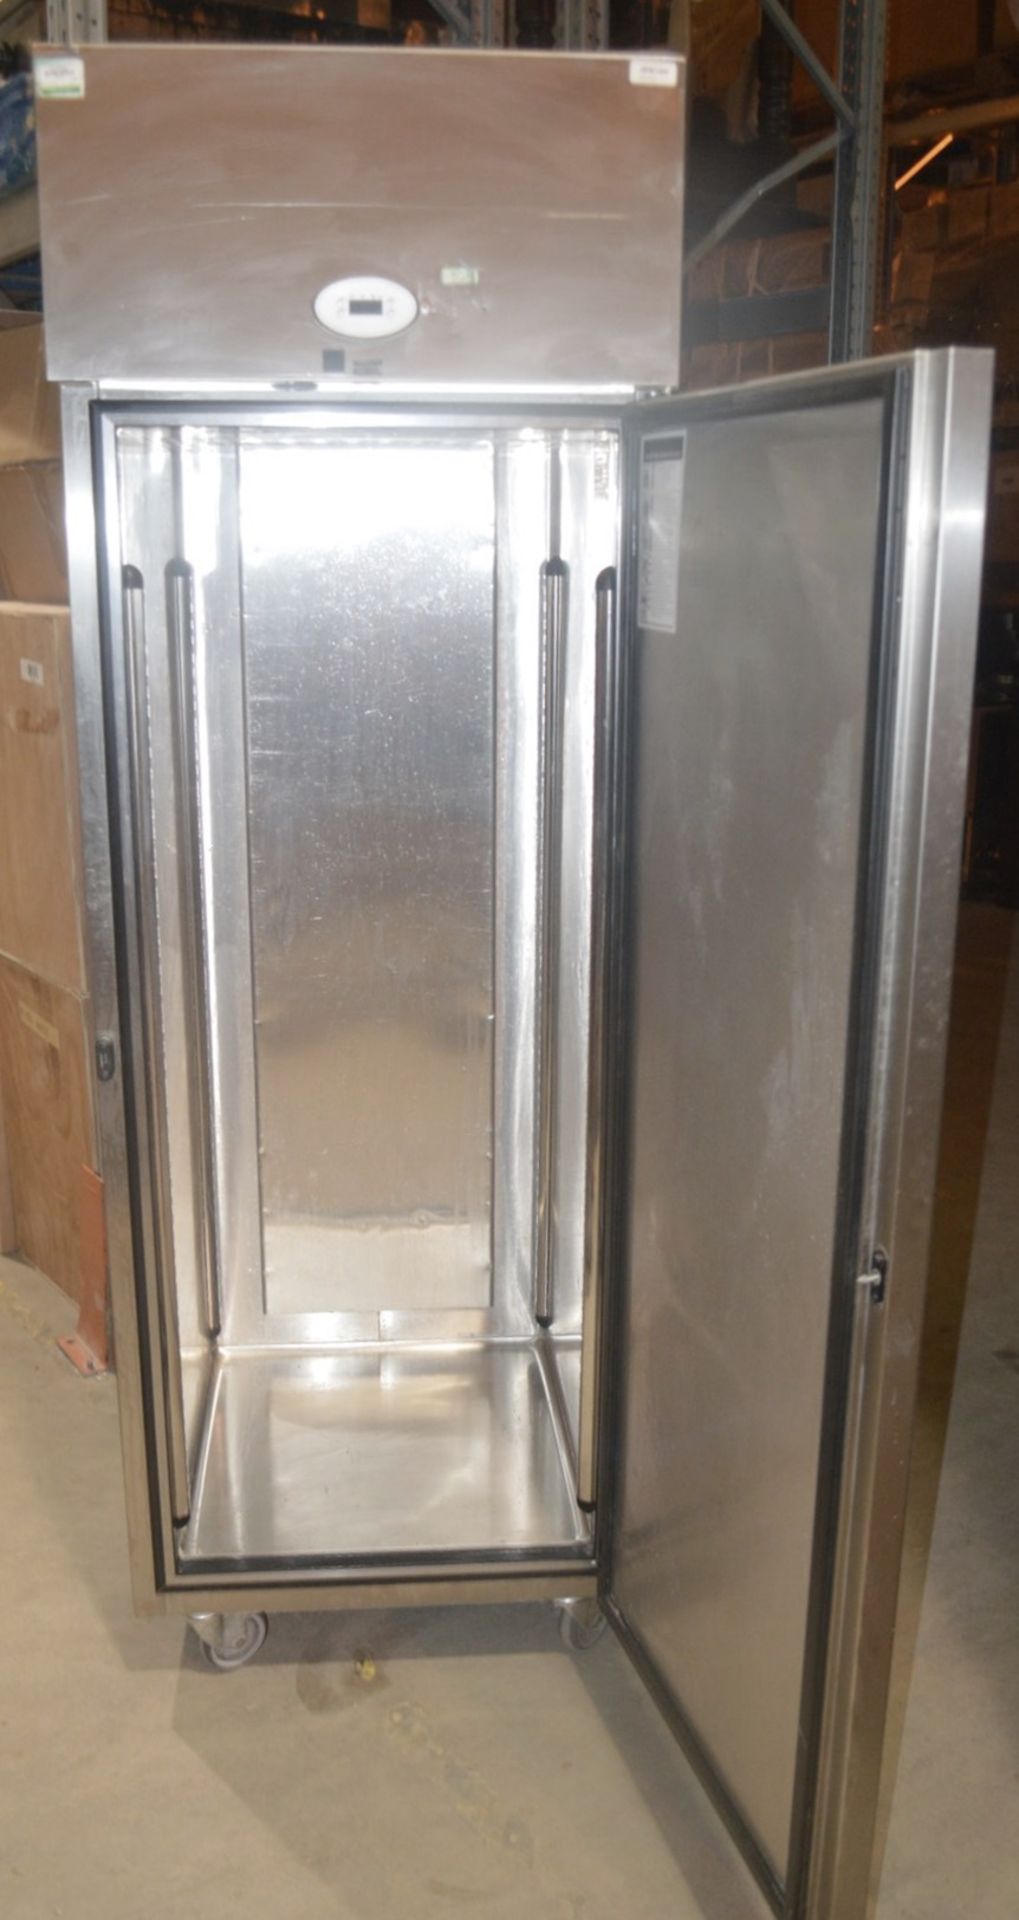 1 x FOSTER Stainless Steel Commercial Upright Freezer (PROG600L) - Dimensions: H208 x W70 x - Image 2 of 8